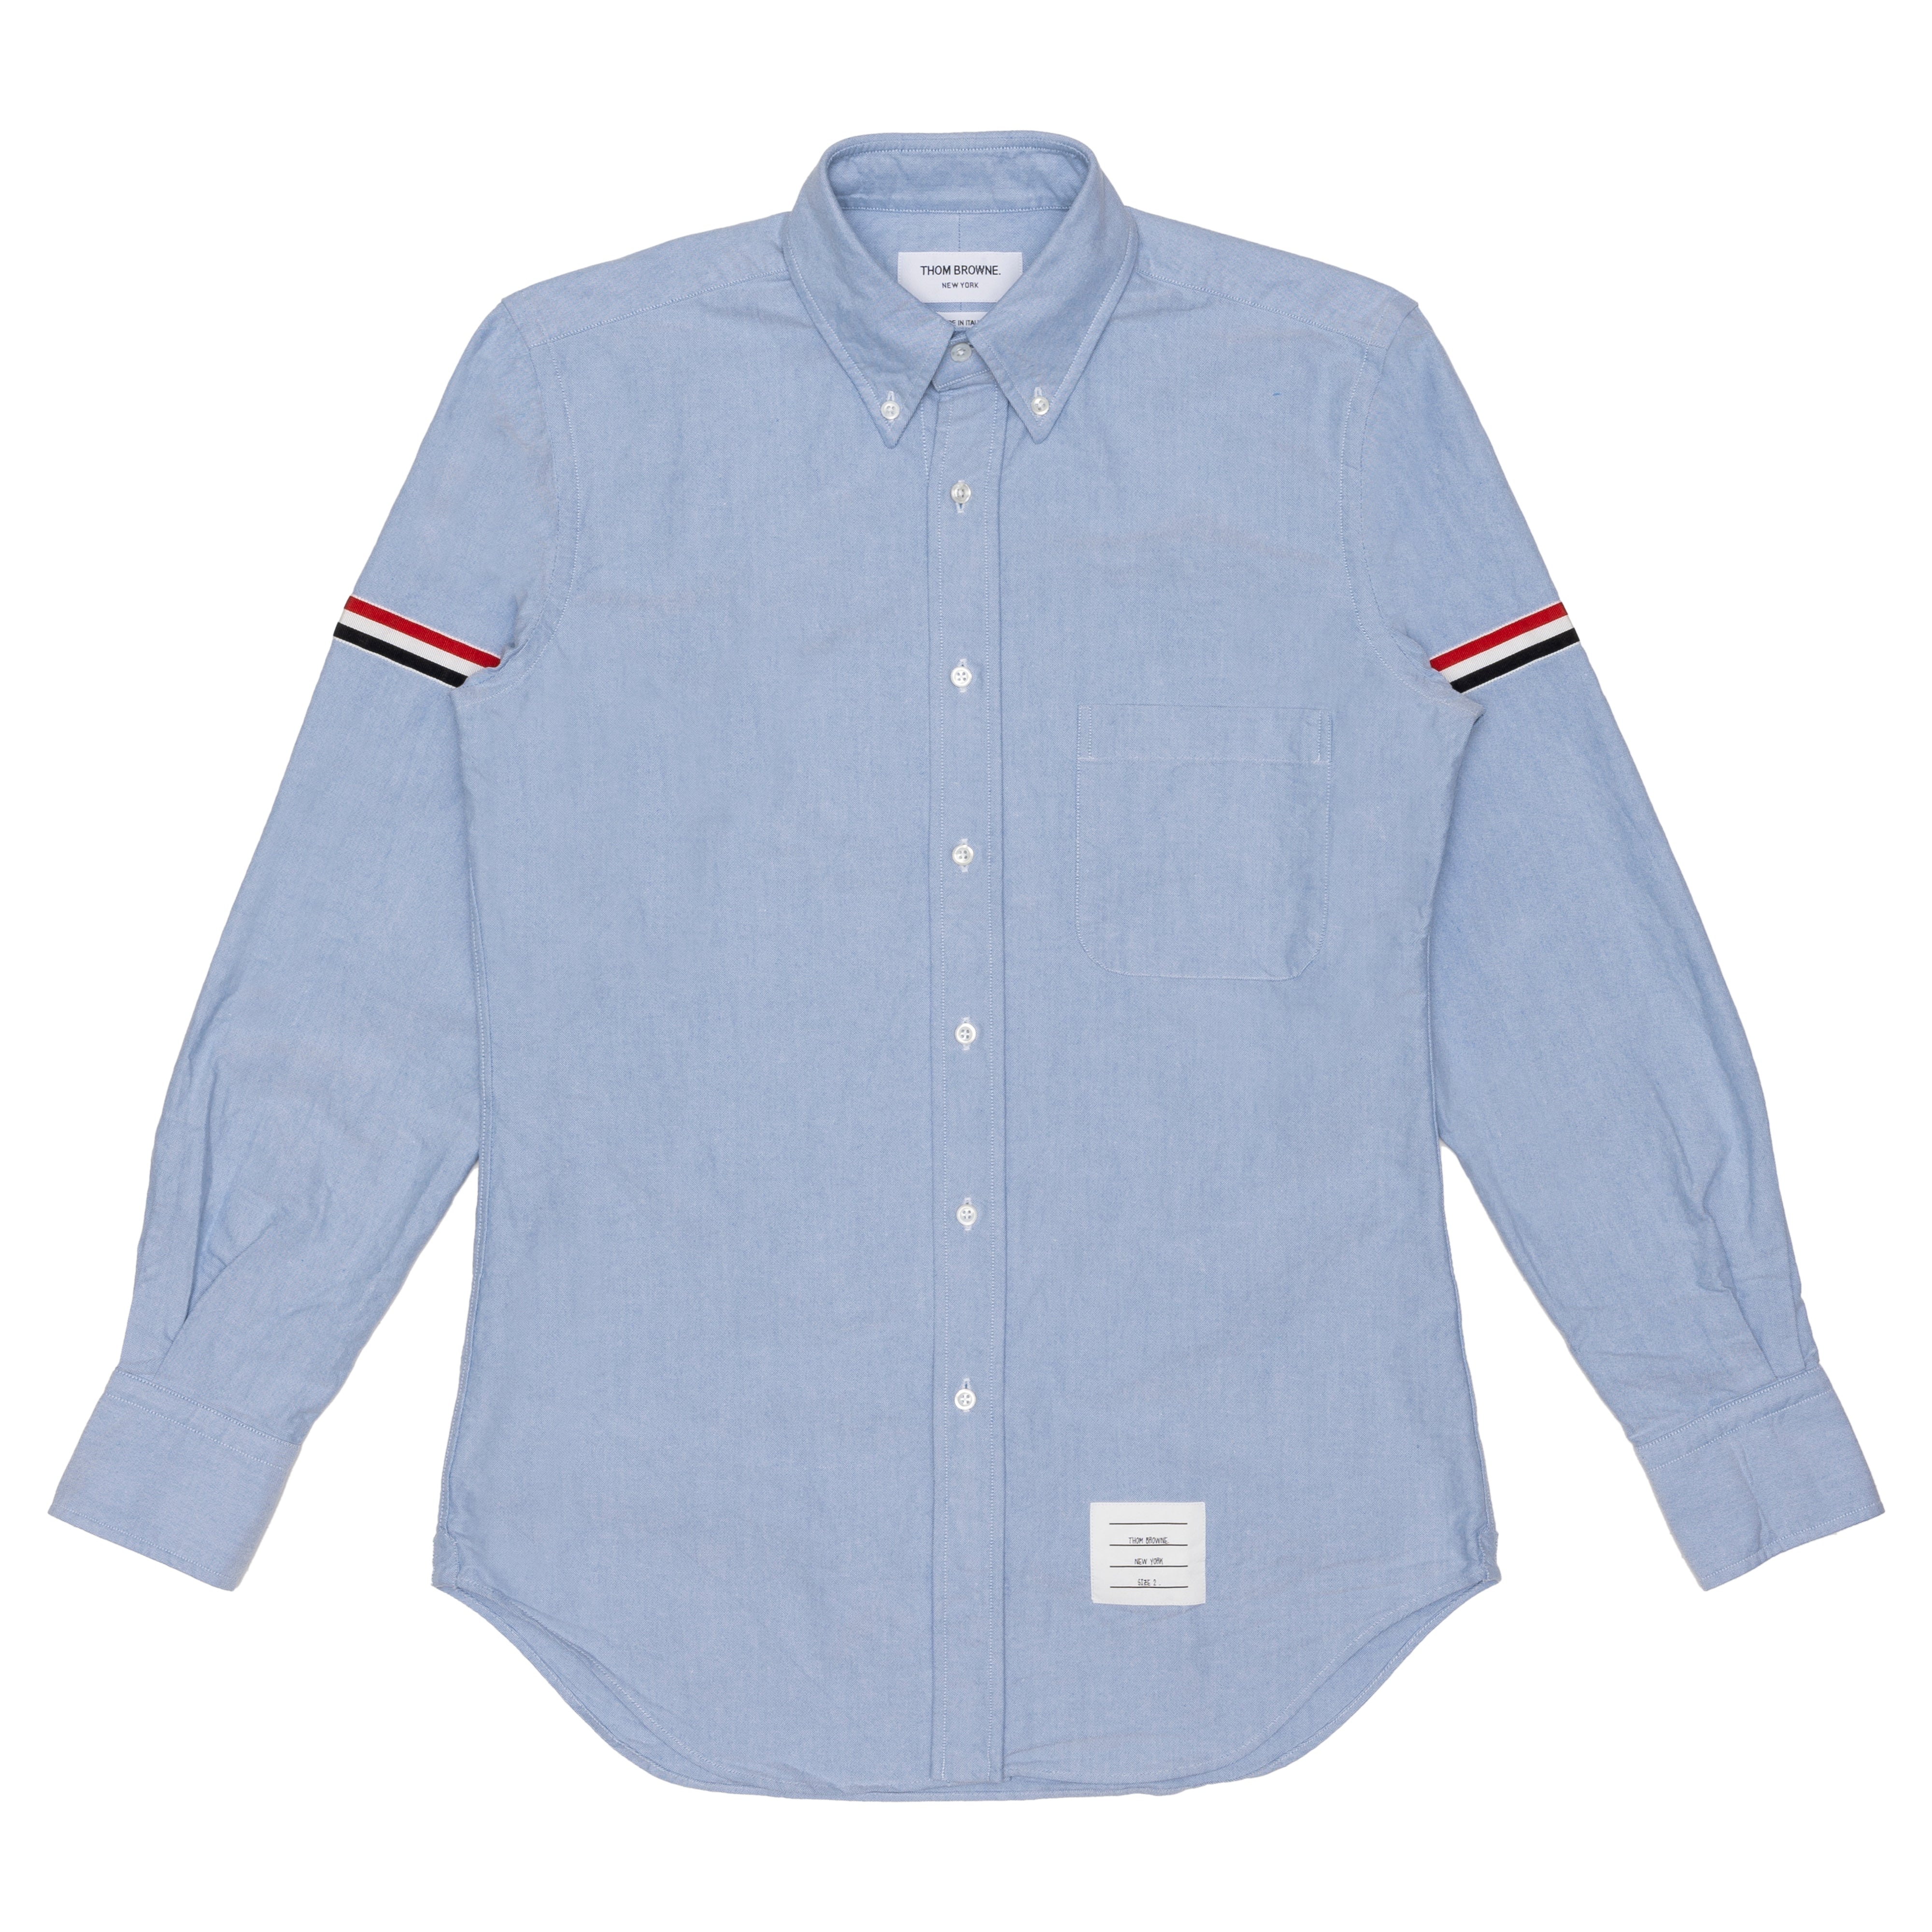 THOM BROWNE - MENS CLASSIC LONG SLEEVE BUTTON DOW - LIGHT BLUE